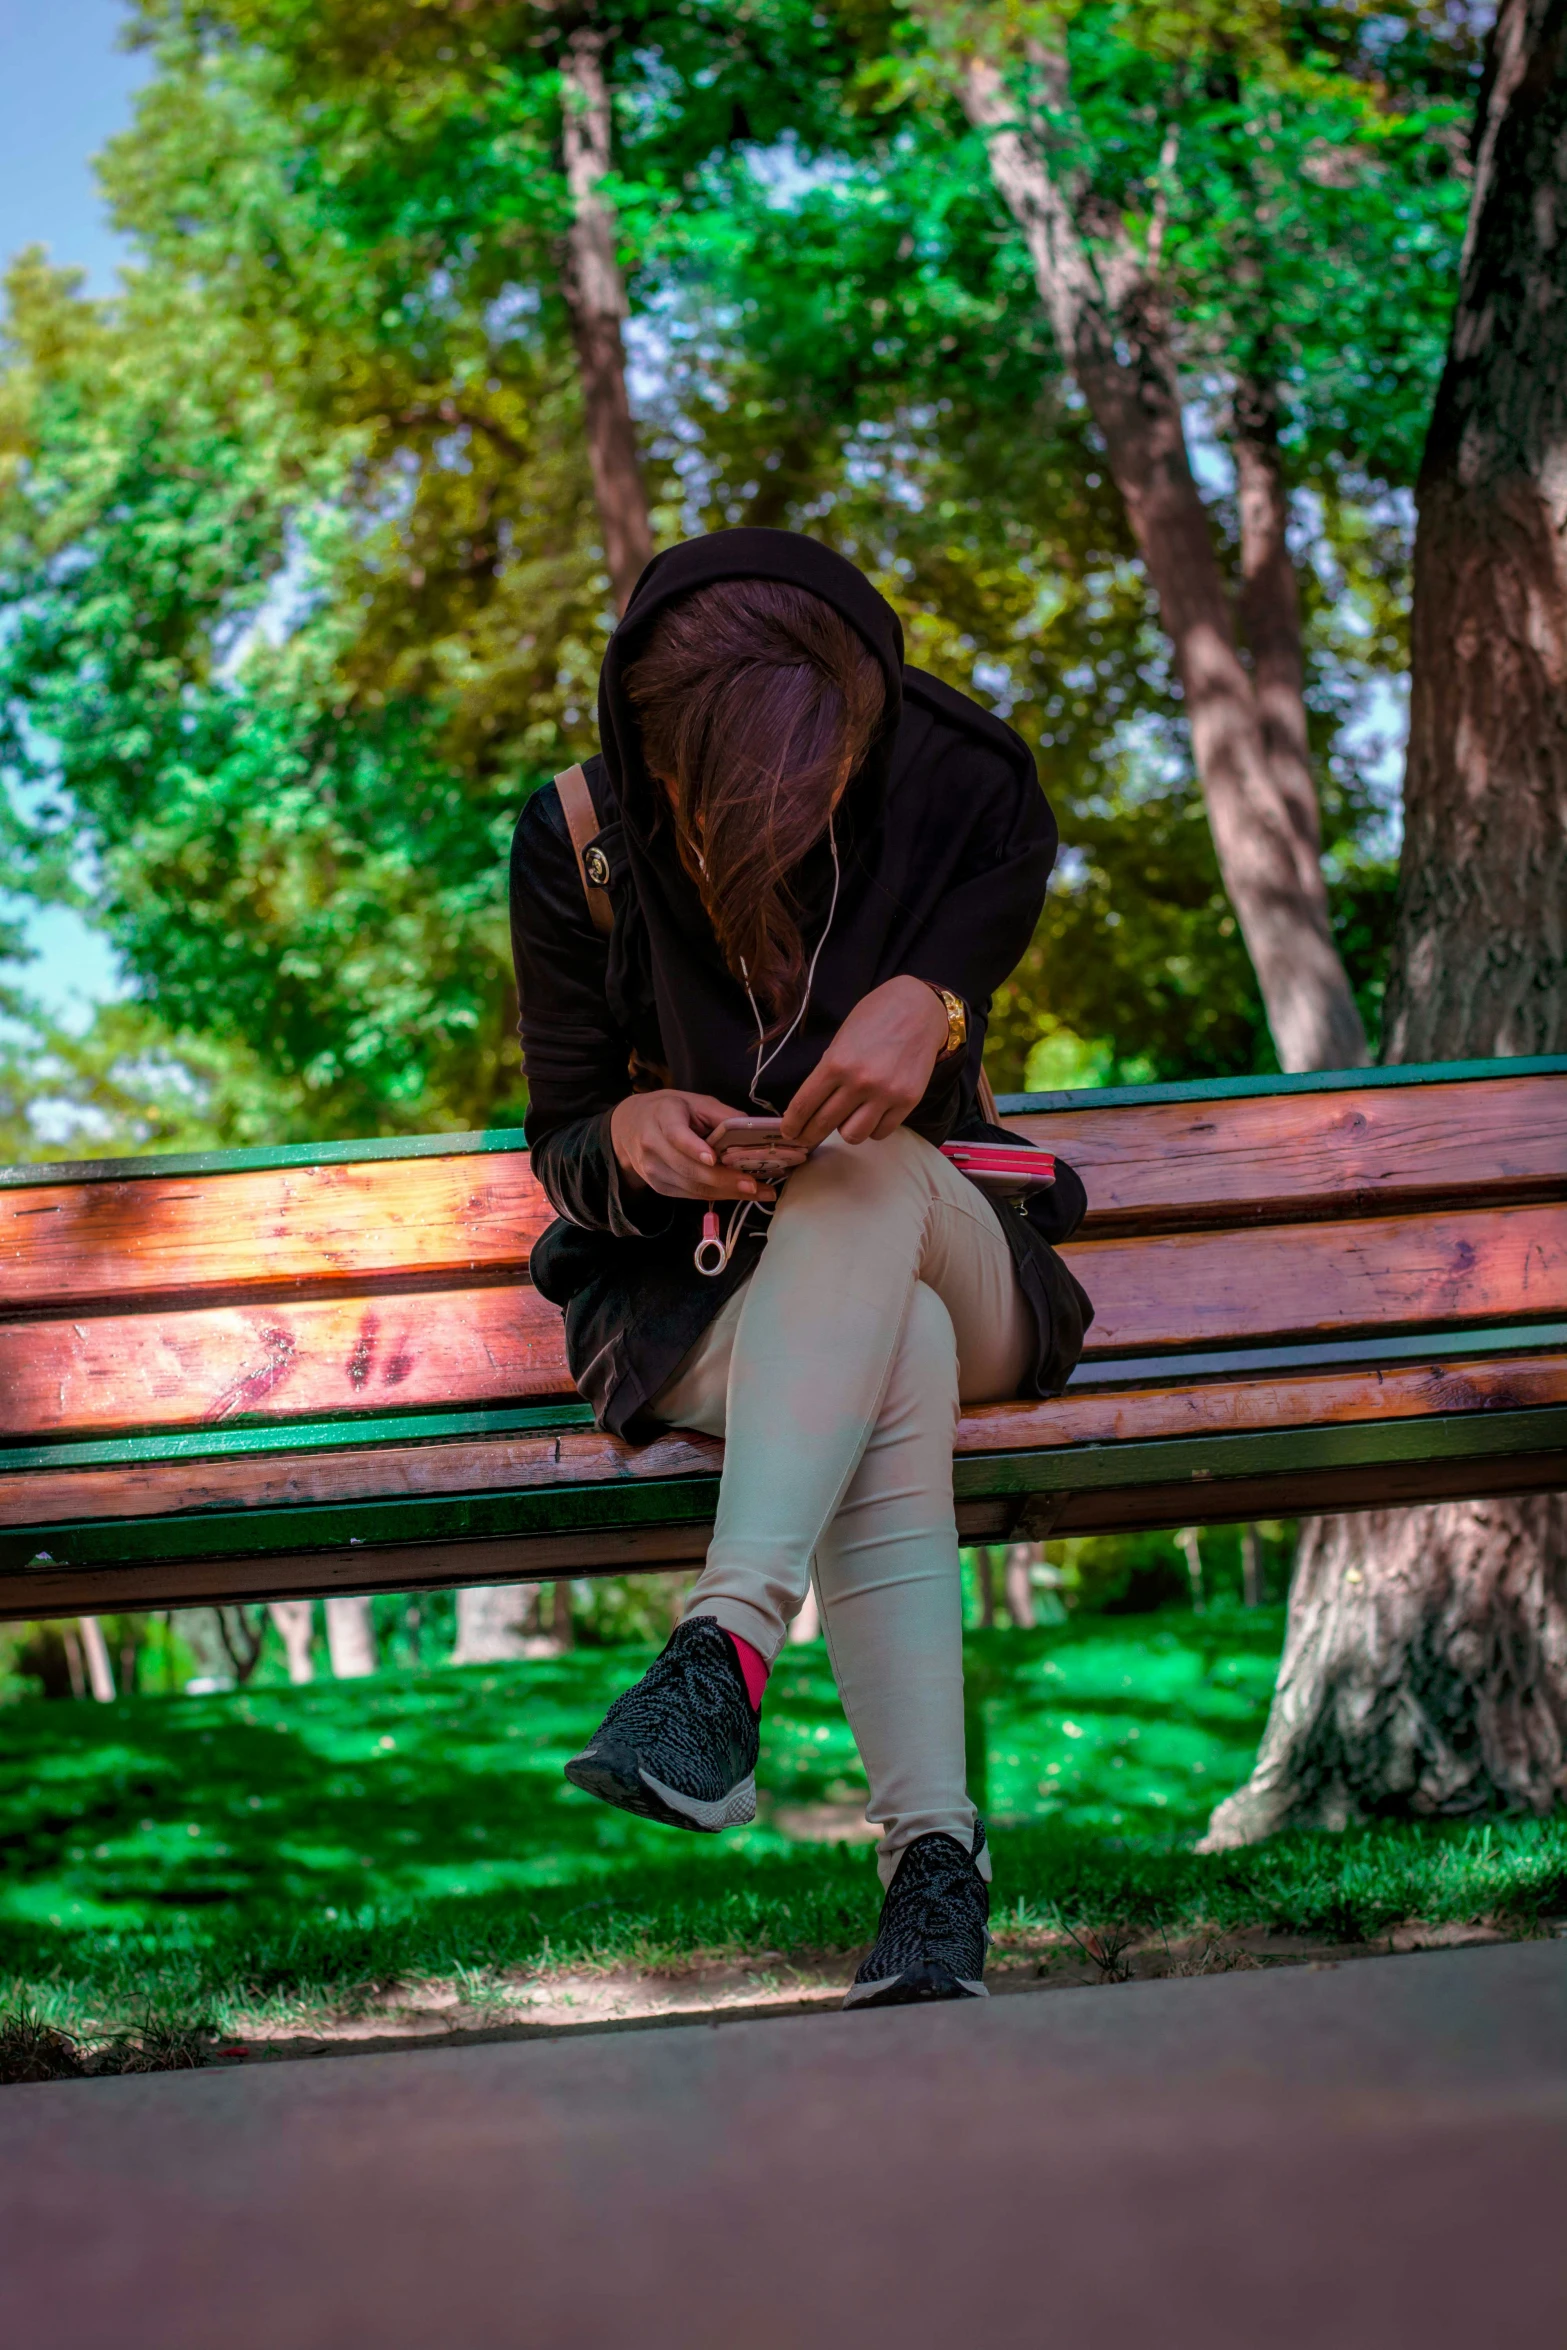 a young person is sitting on a wooden bench